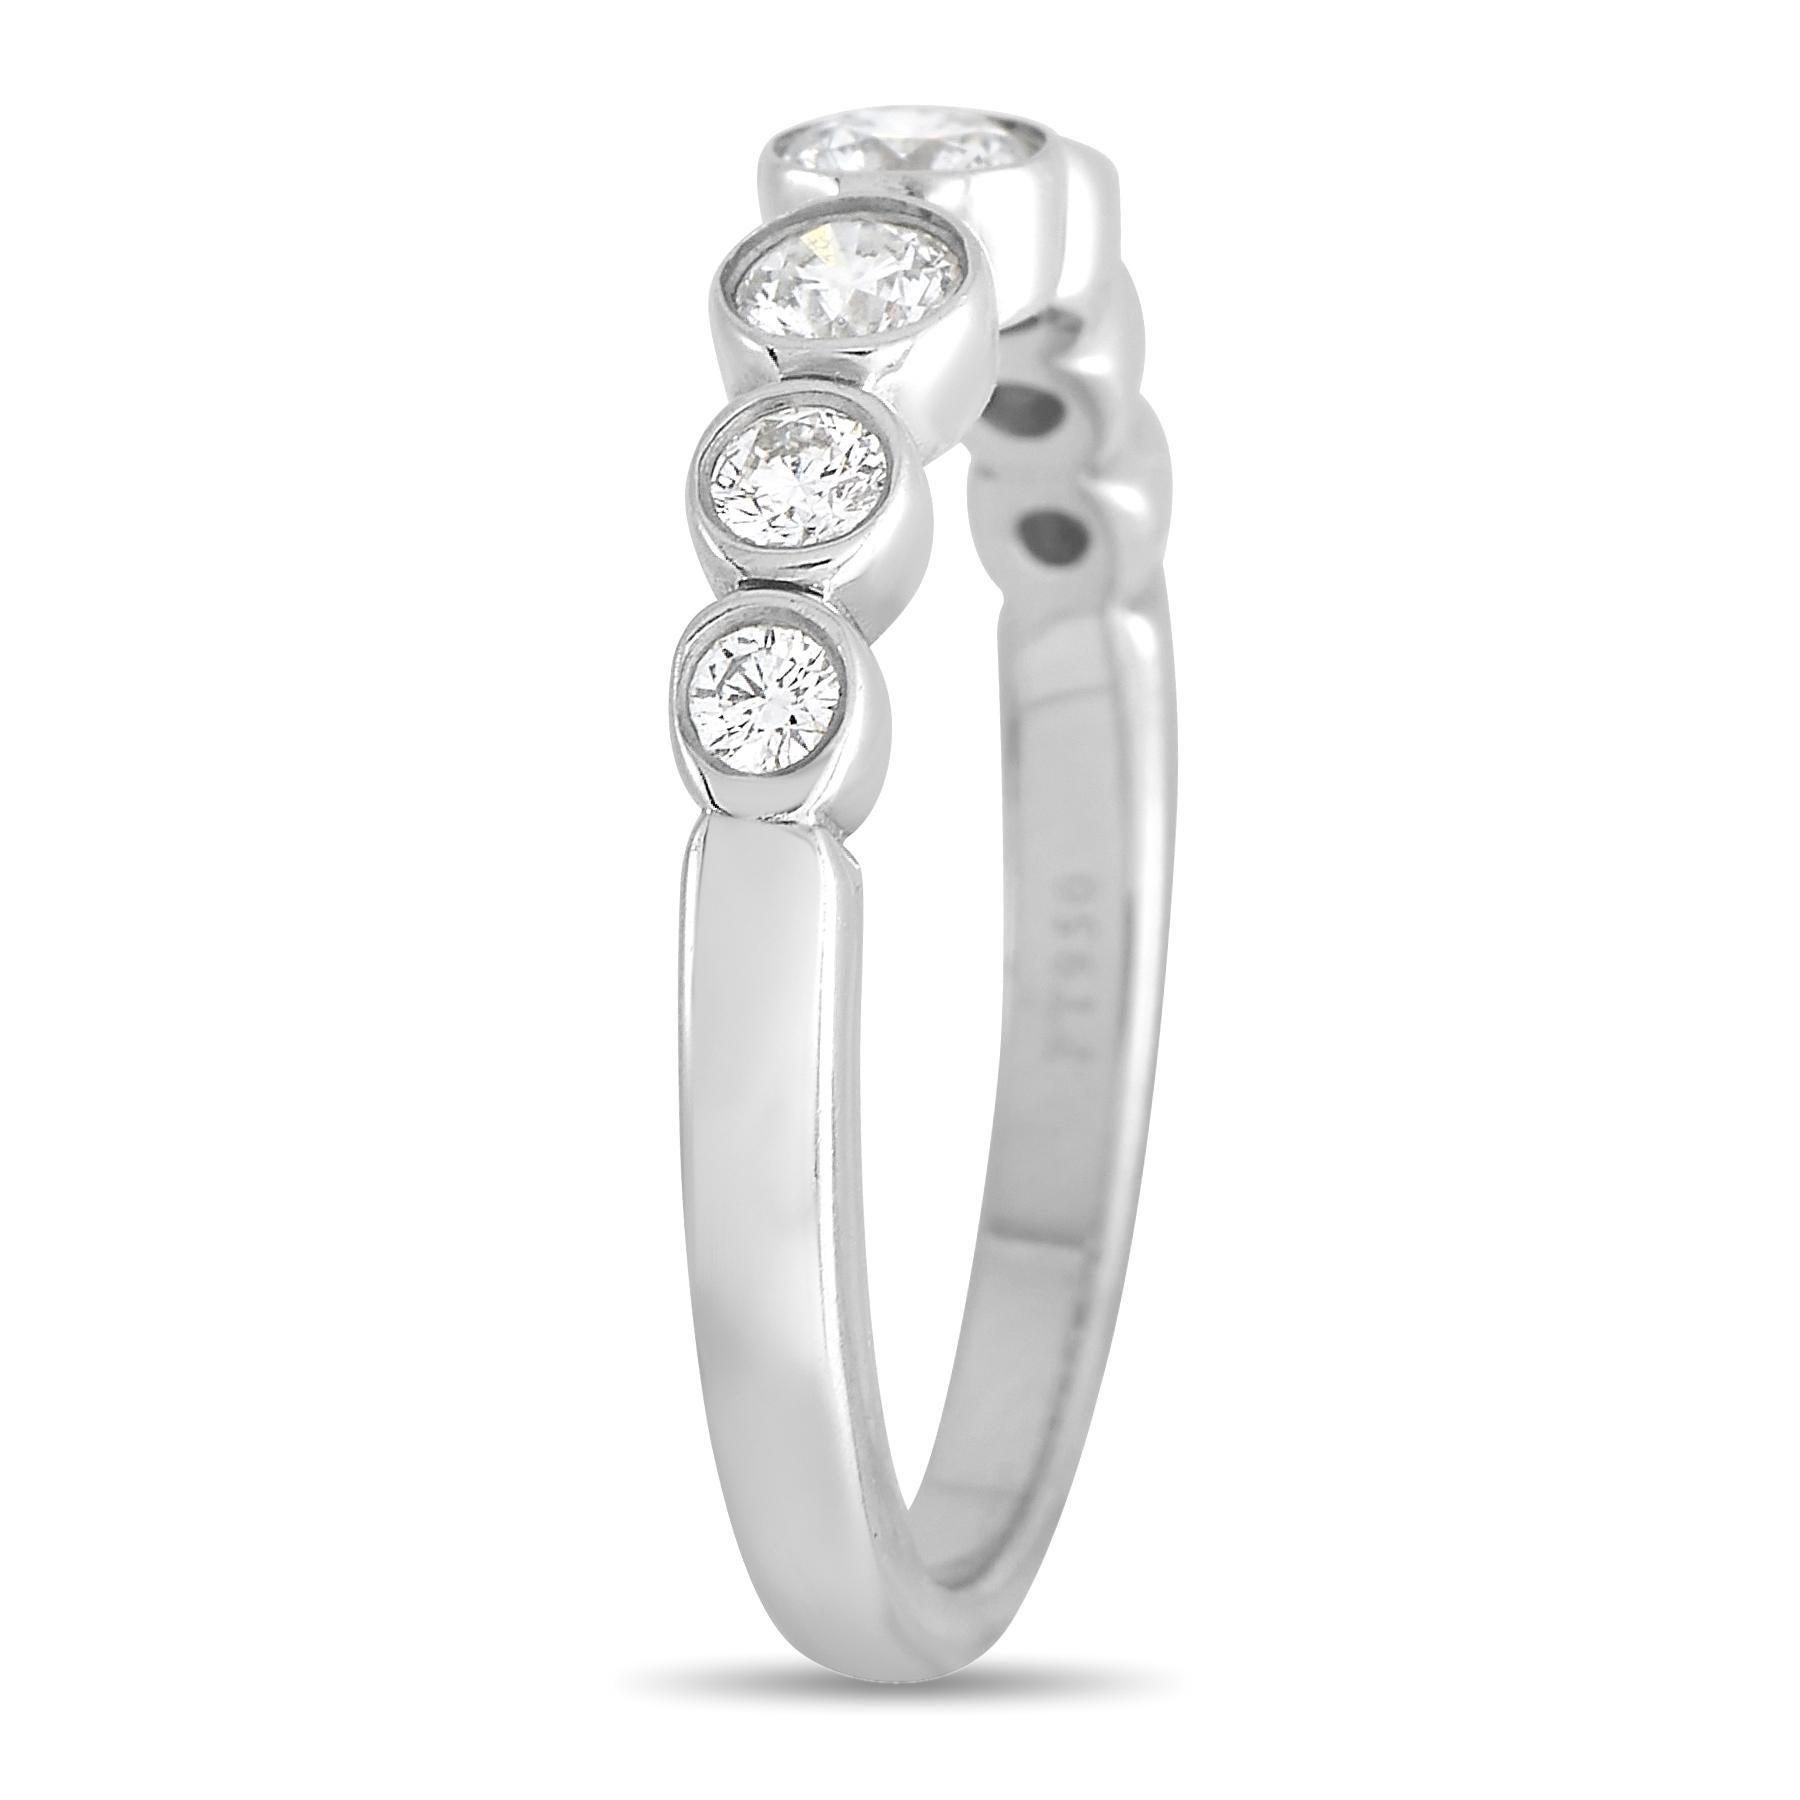 This Tiffany & Co. Jazz ring is incredibly sophisticated in design. A pure platinum setting with a band width and top height measuring 2mm provides the perfect backdrop for this piece’s sparkling diamonds, which total 0.31 carats and sit within a